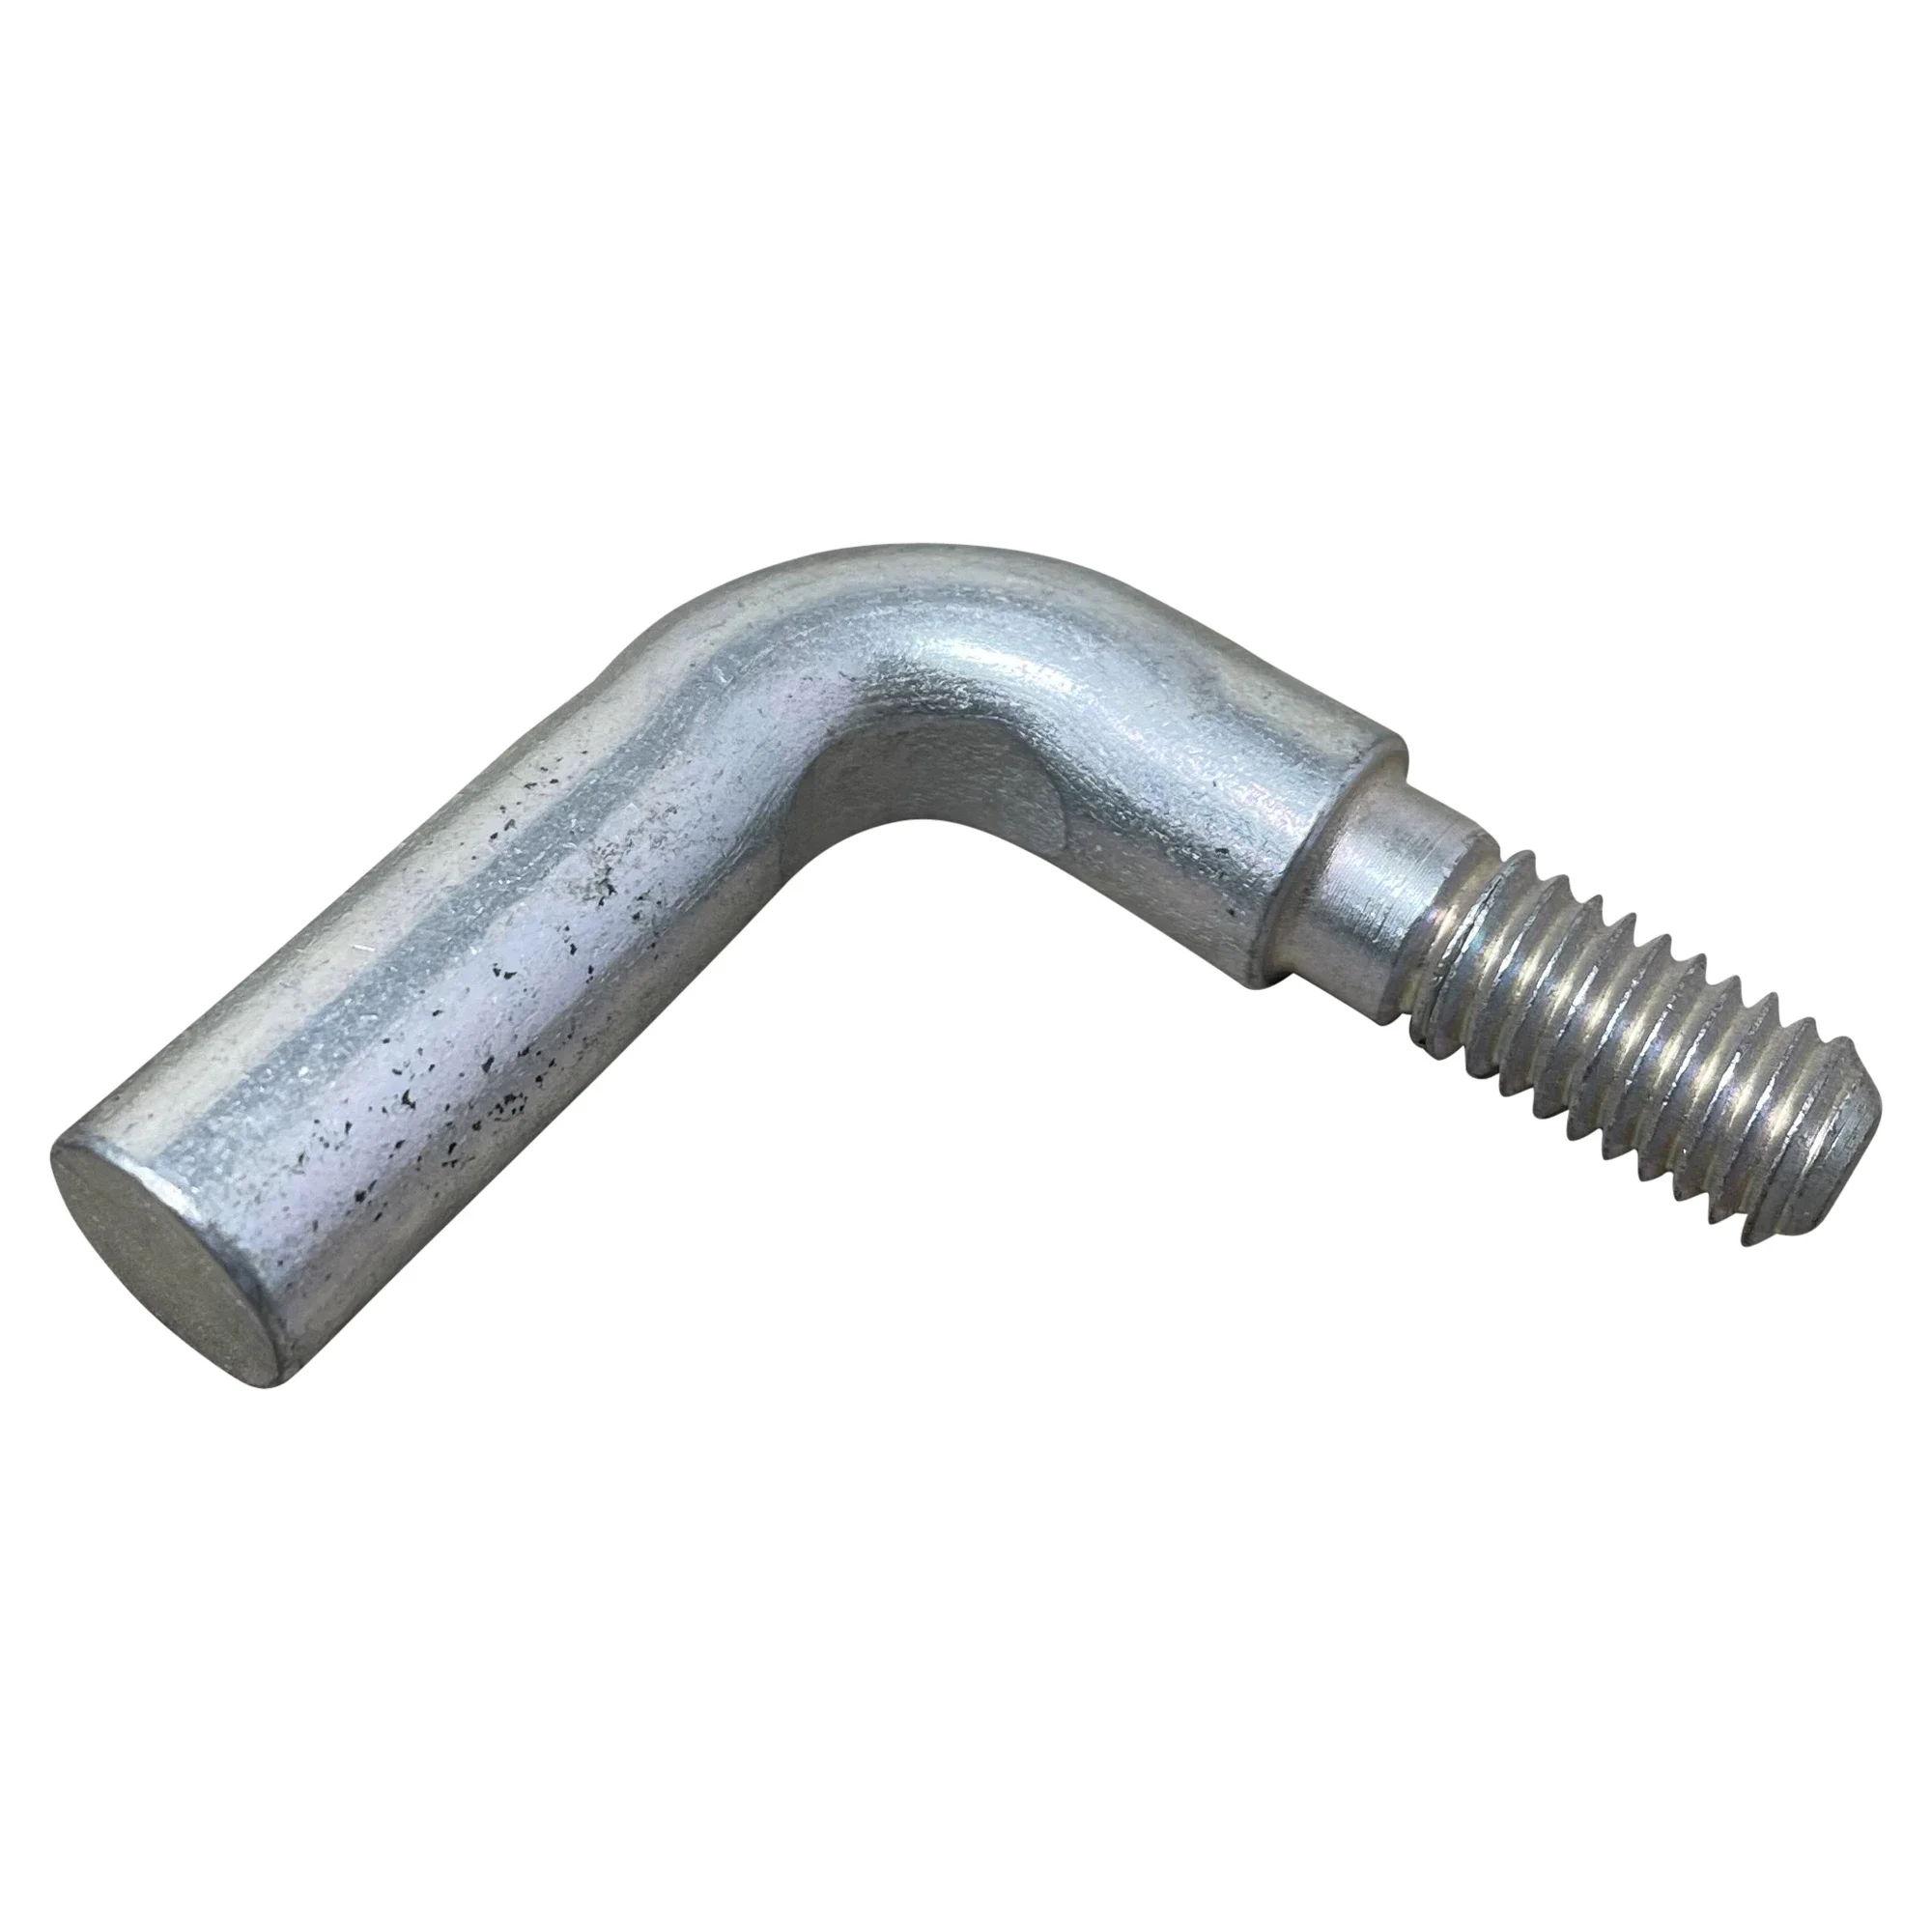 Wastebuilt® Replacement for McNeilus Fastener-Break Away, With Notch